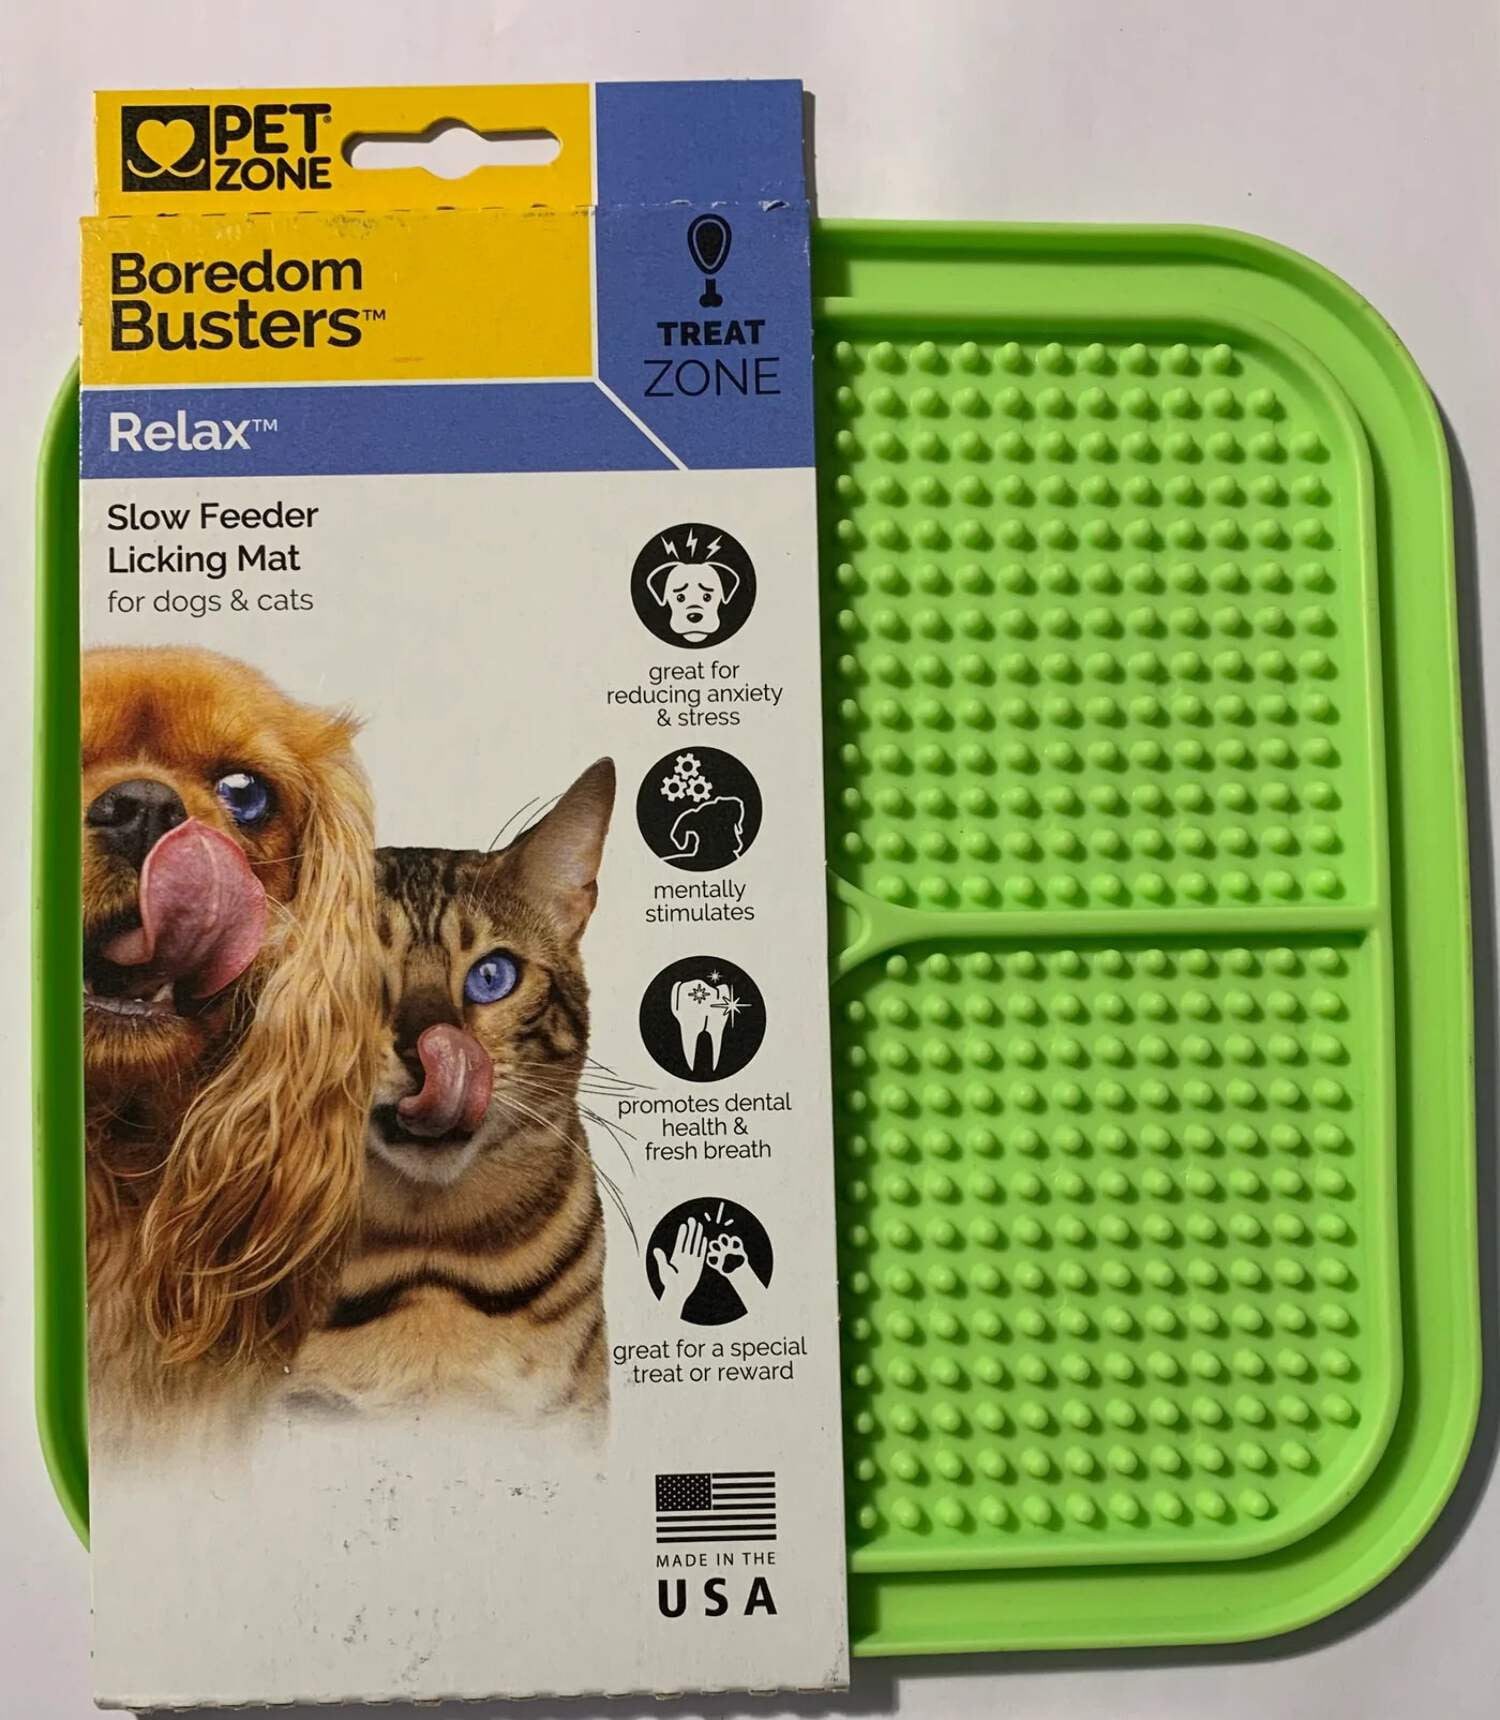 Pet Zone Boredom Buster Relax Lick Mat for Cats and Dogs 